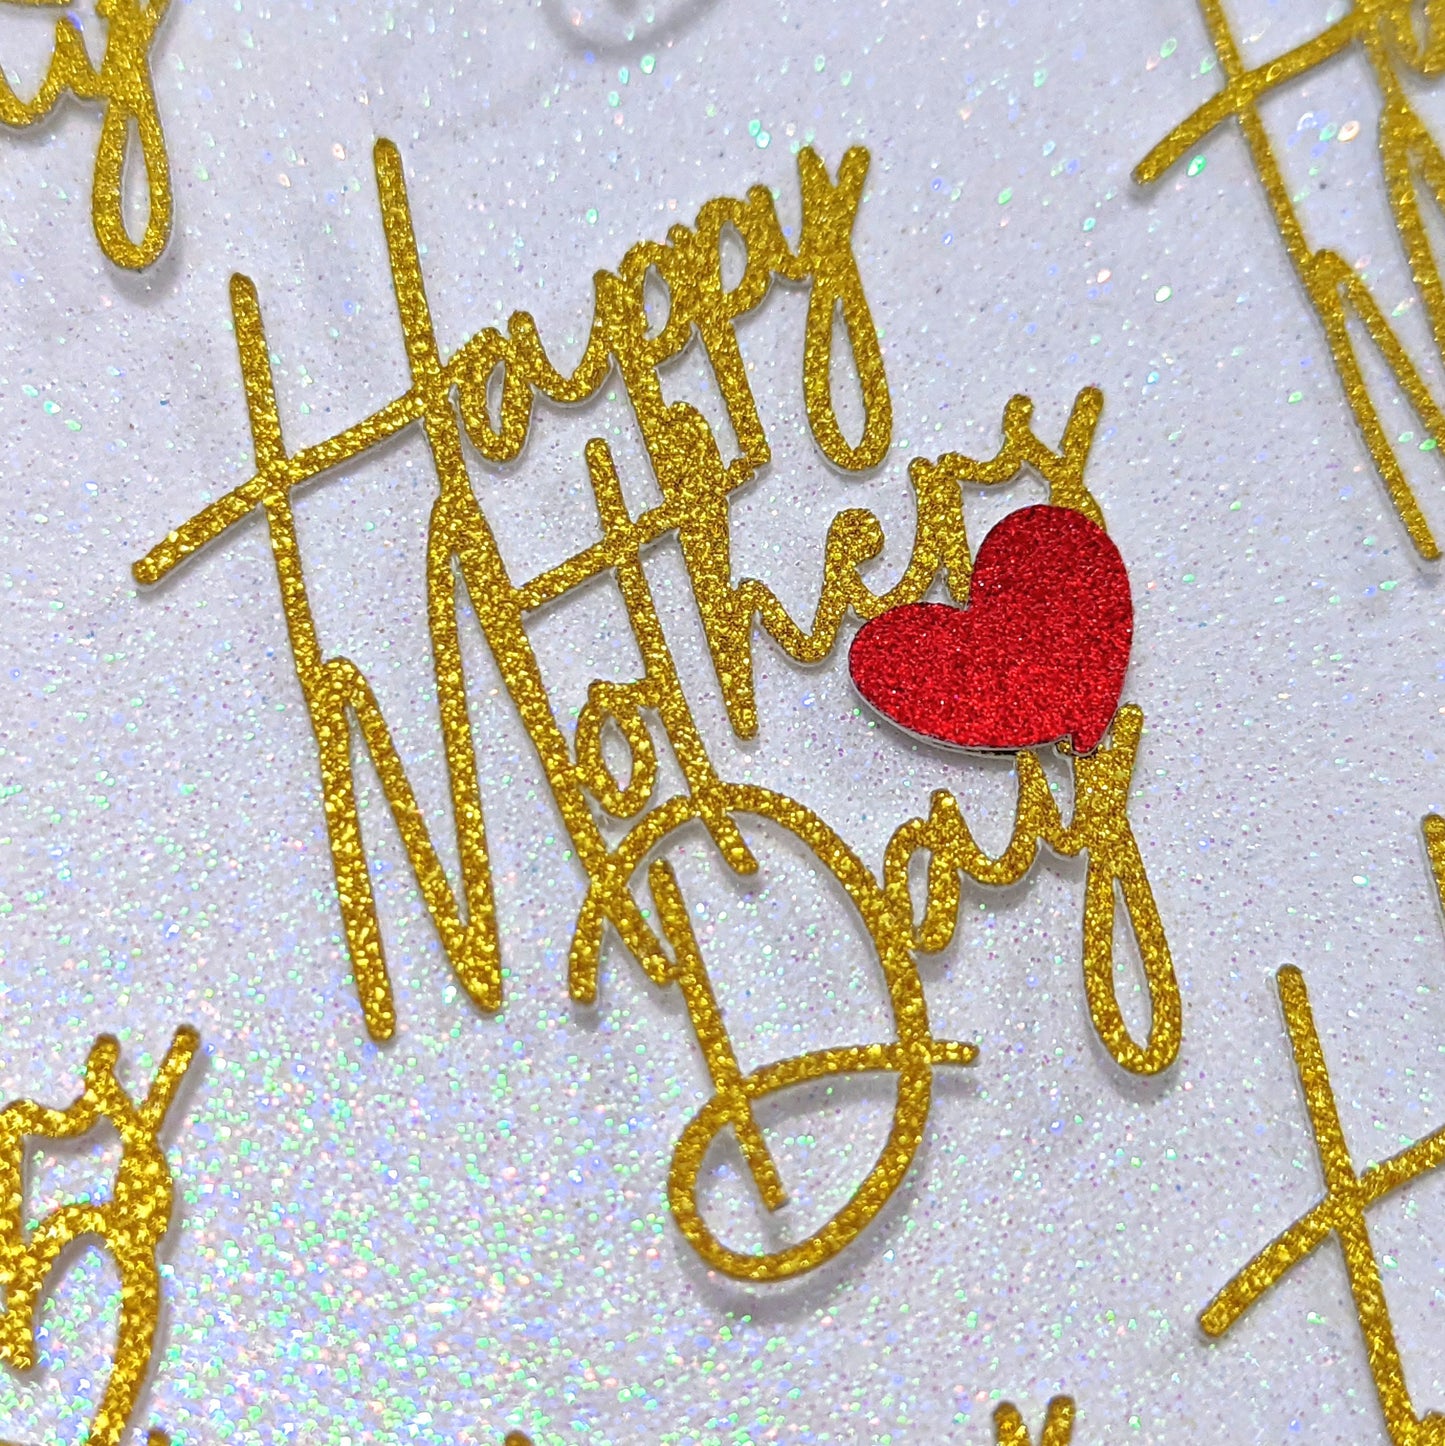 12 Happy Mothers Day Cupcake Toppers Gold Silver Free Delivery Non Edible 2.4x2"